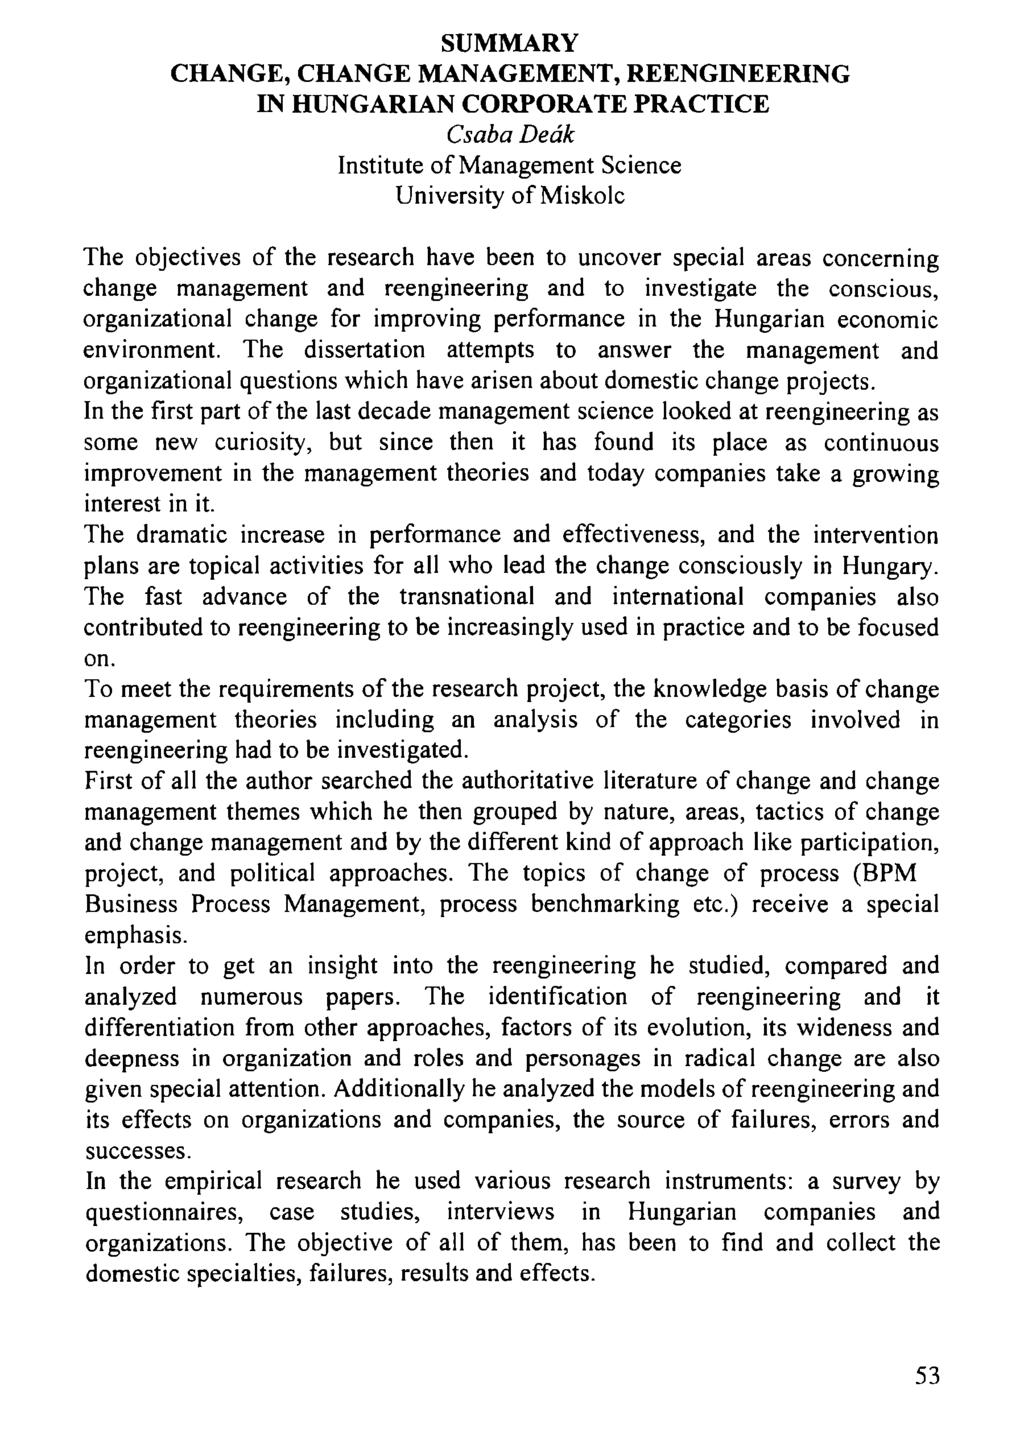 SUMMARY CHANGE, CHANGE MANAGEMENT, REENGINEERING IN HUNGARIAN CORPORATE PRACTICE Csaba Deák Institute of Management Science University of Miskolc The objectives of the research have been to uncover